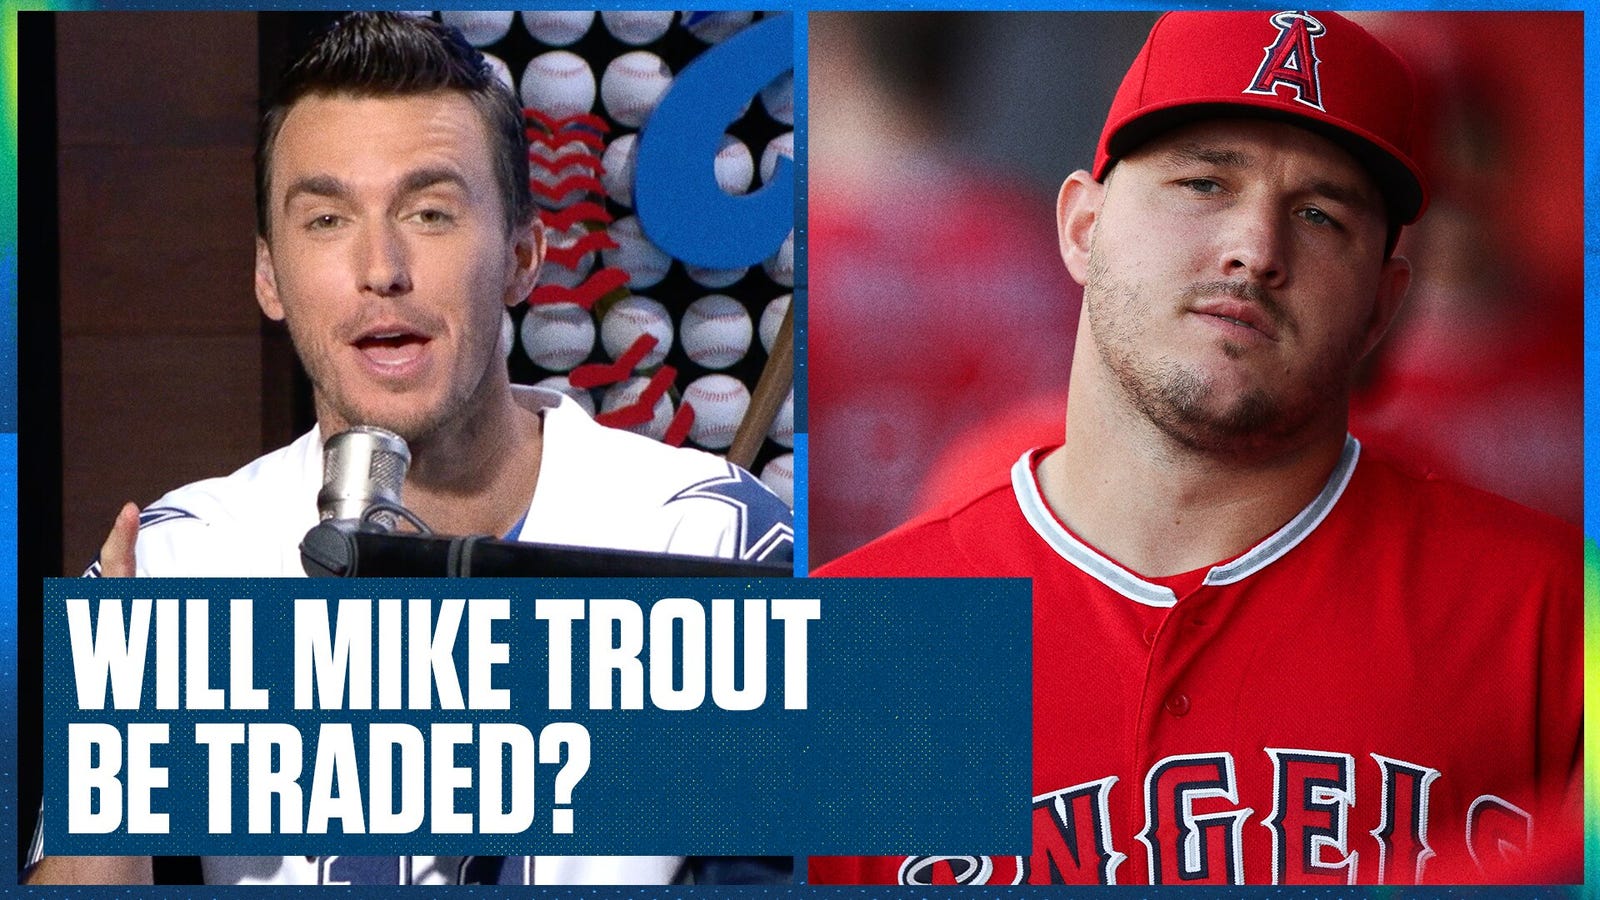 Has Mike Trout played his last game for the Angels?